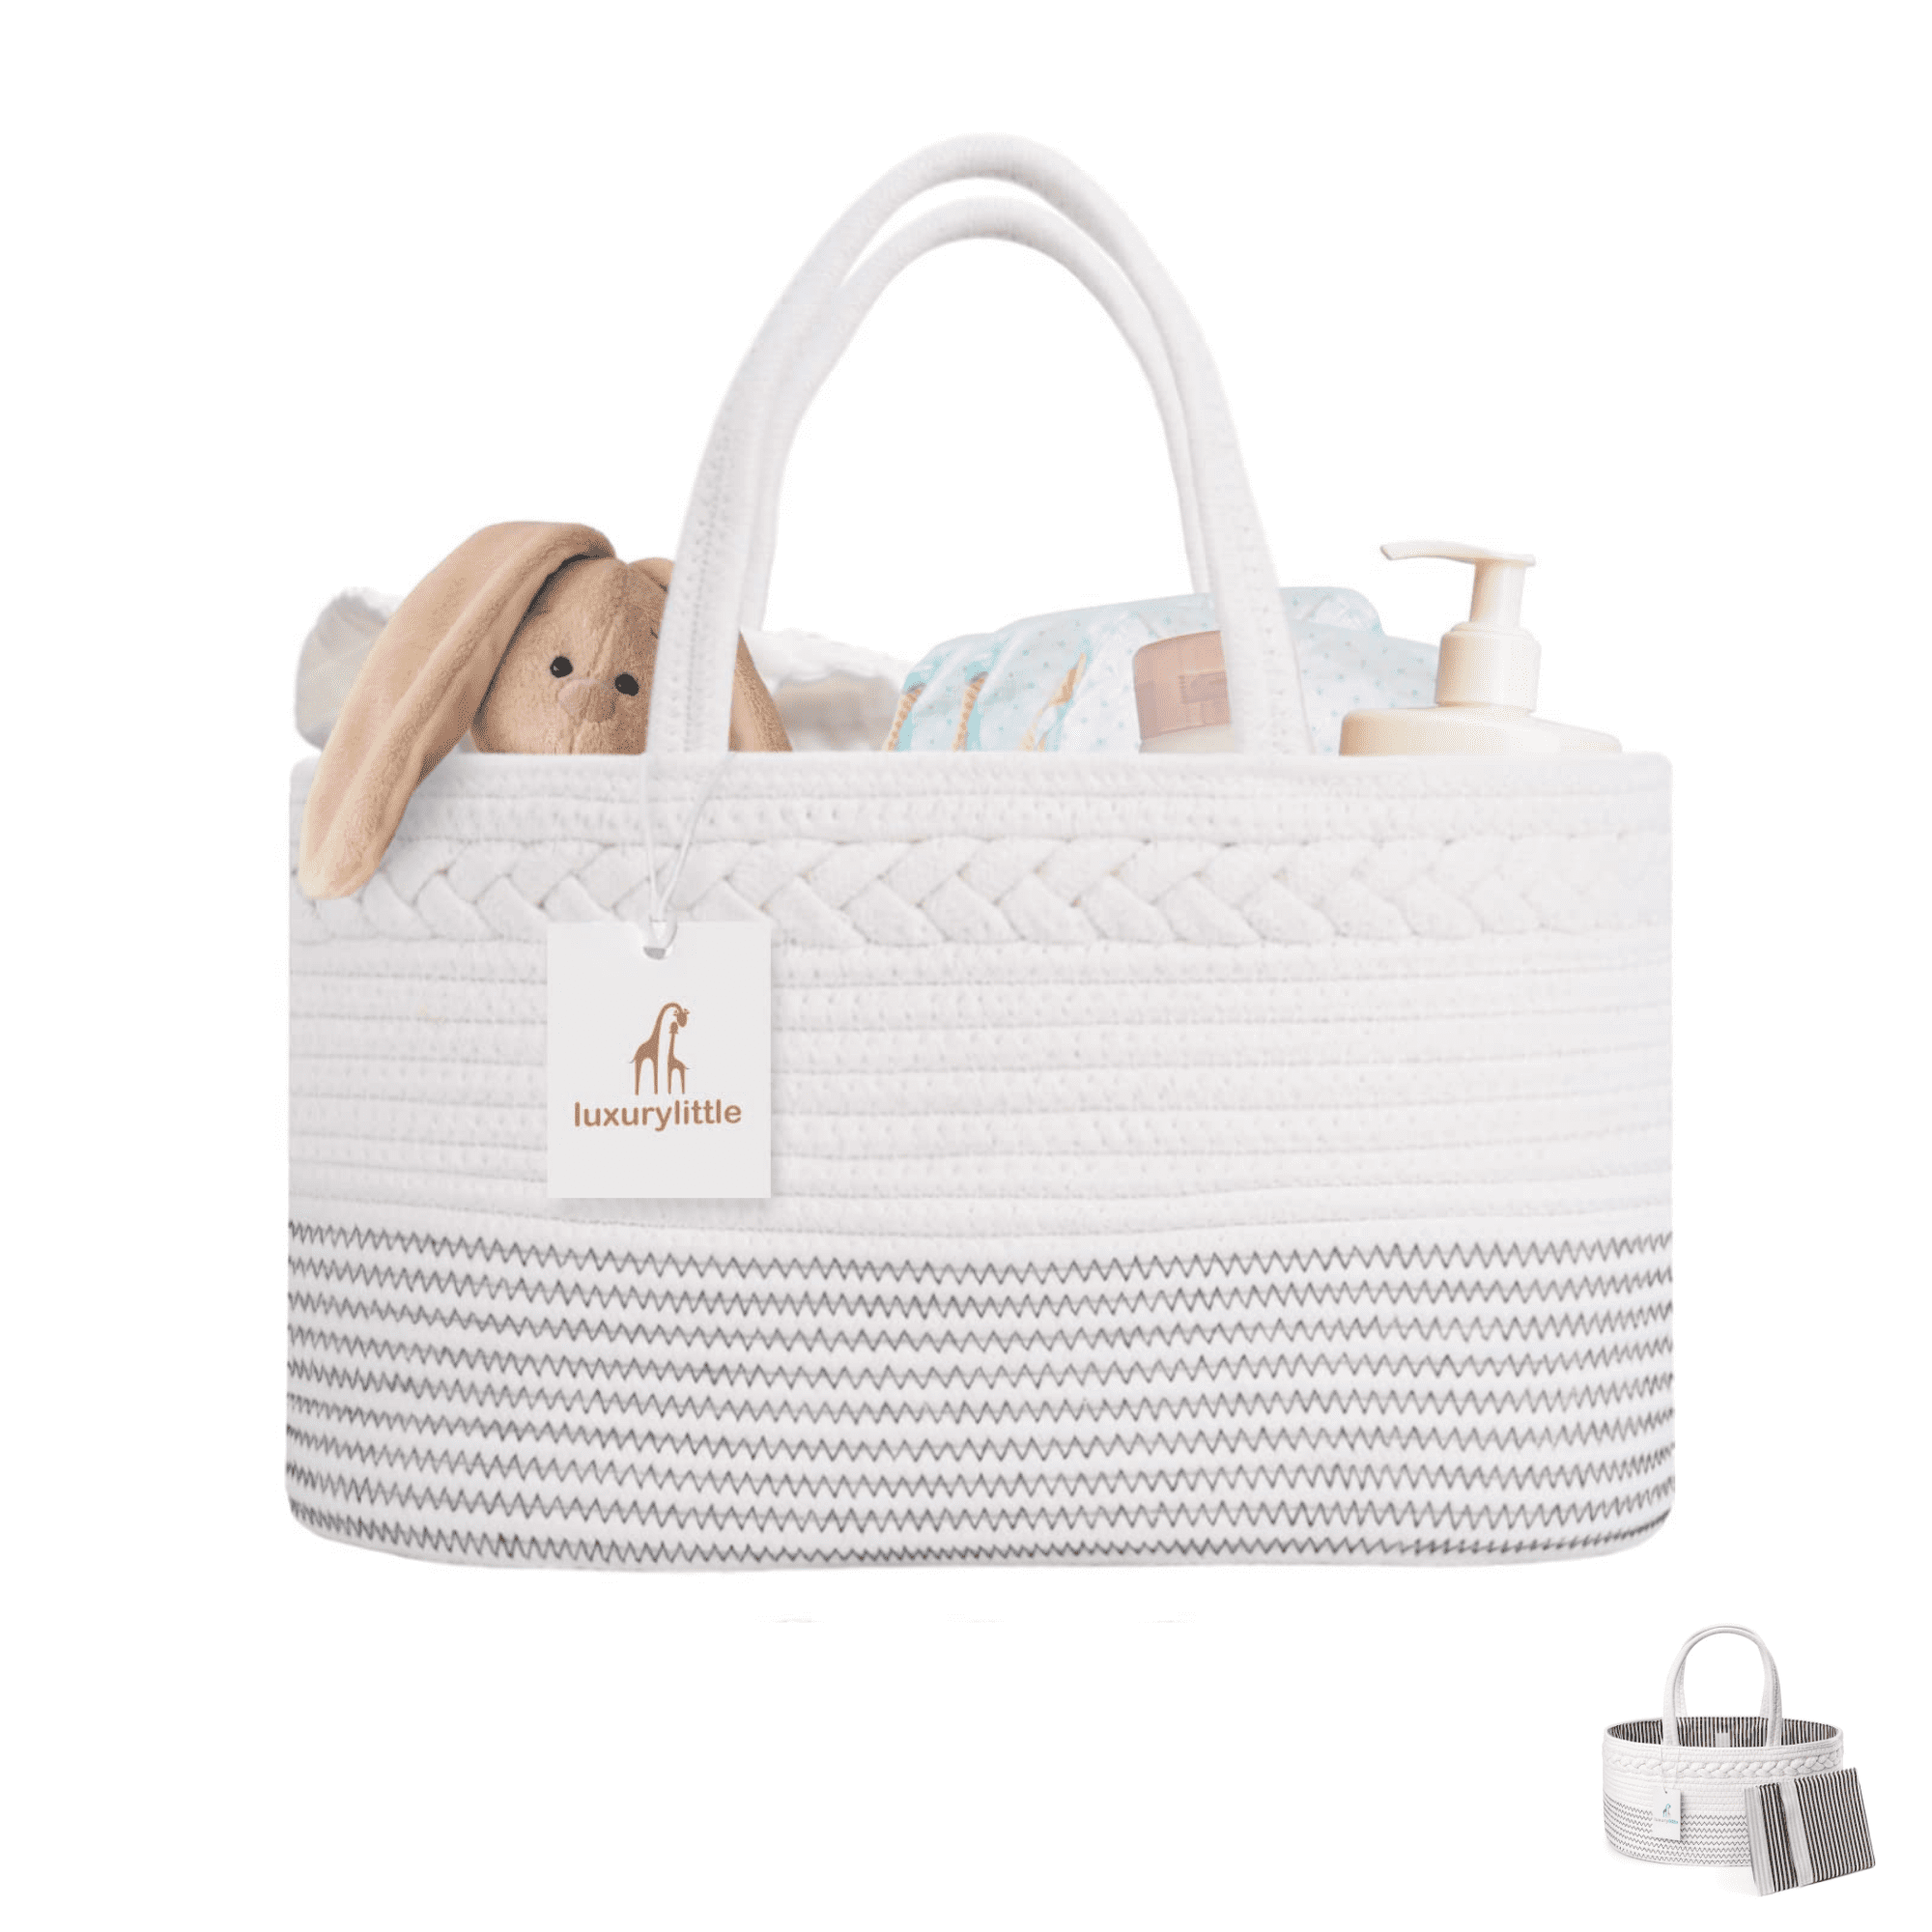 Spacious baby baskets for ultimate lounging comfort 🌼